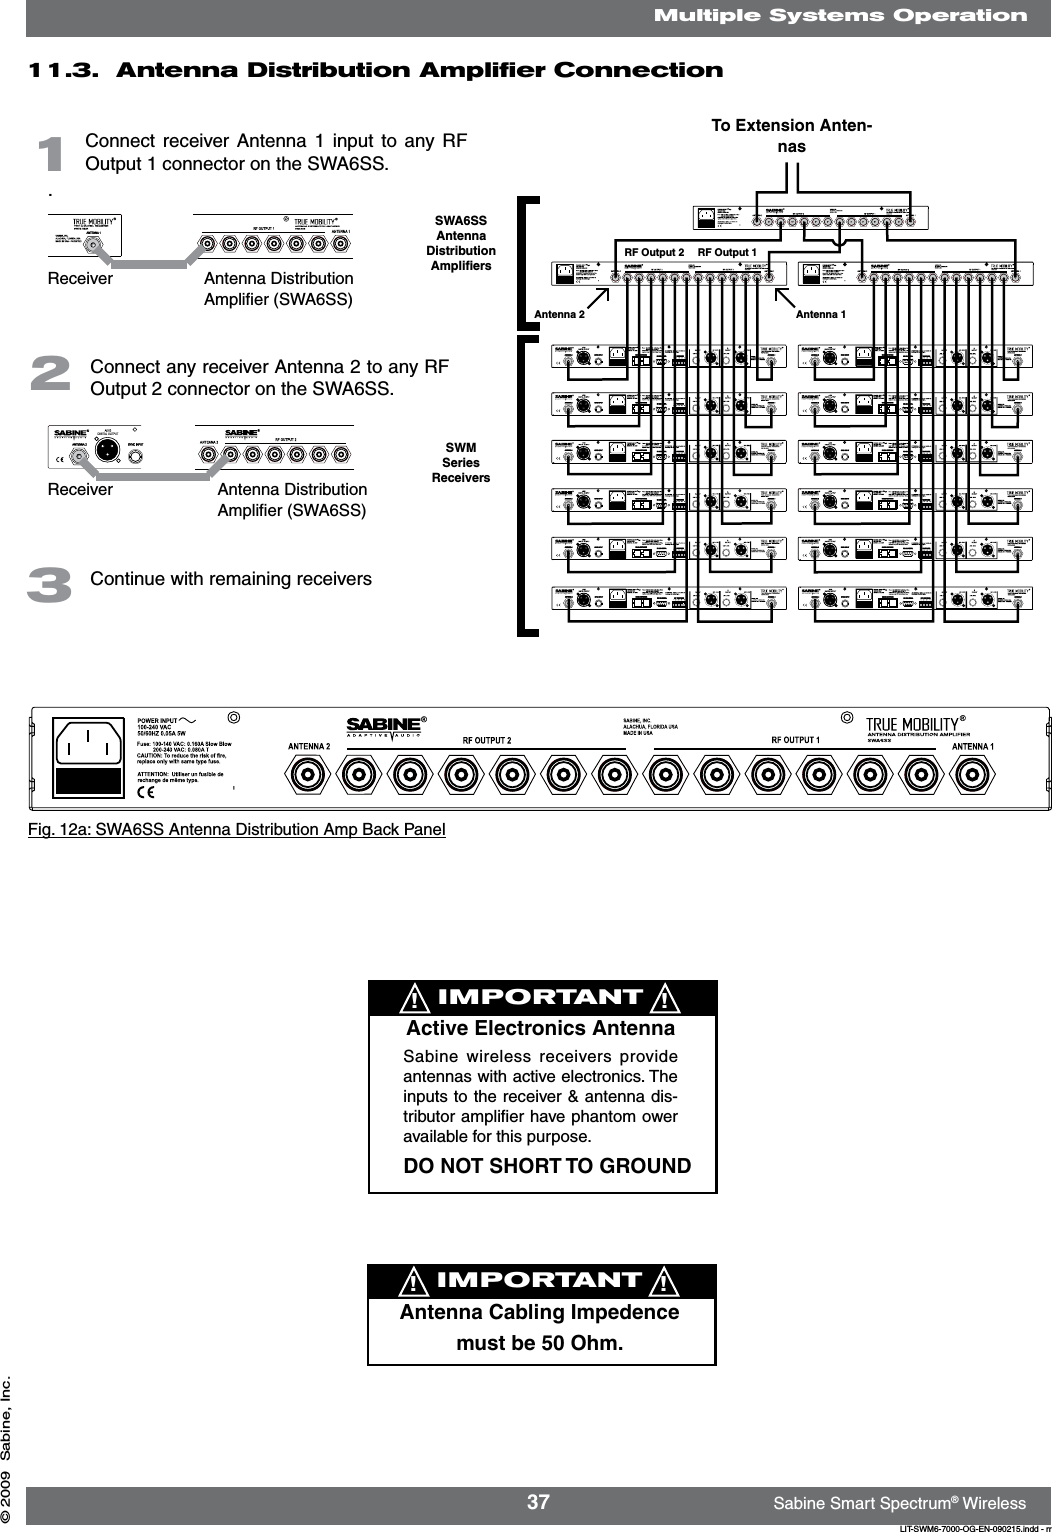 37 Sabine Smart Spectrum® WirelessLIT-SWM6-7000-OG-EN-090215.indd - rr© 2009  Sabine, Inc.11.3.  Antenna Distribution Ampliﬁer ConnectionMultiple Systems OperationFig. 12a: SWA6SS Antenna Distribution Amp Back PanelTo Extension Anten-nasAntenna 1RF Output 2 RF Output 1SWA6SSAntennaDistributionAmpliﬁersSWMSeriesReceiversAntenna 2132IMPORTANTAntenna Cabling Impedencemust be 50 Ohm.! !IMPORTANTActive Electronics Antenna Sabine wireless receivers provide antennas with active electronics. The inputs to the receiver &amp; antenna dis-tributor ampliﬁer have phantom ower available for this purpose.DO NOT SHORT TO GROUND! !  Connect receiver Antenna  1  input  to  any RF Output 1 connector on the SWA6SS..   Connect any receiver Antenna 2 to any RF Output 2 connector on the SWA6SS.  Continue with remaining receiversAntenna Distribution Ampliﬁer (SWA6SS)ReceiverAntenna Distribution Ampliﬁer (SWA6SS)Receiver